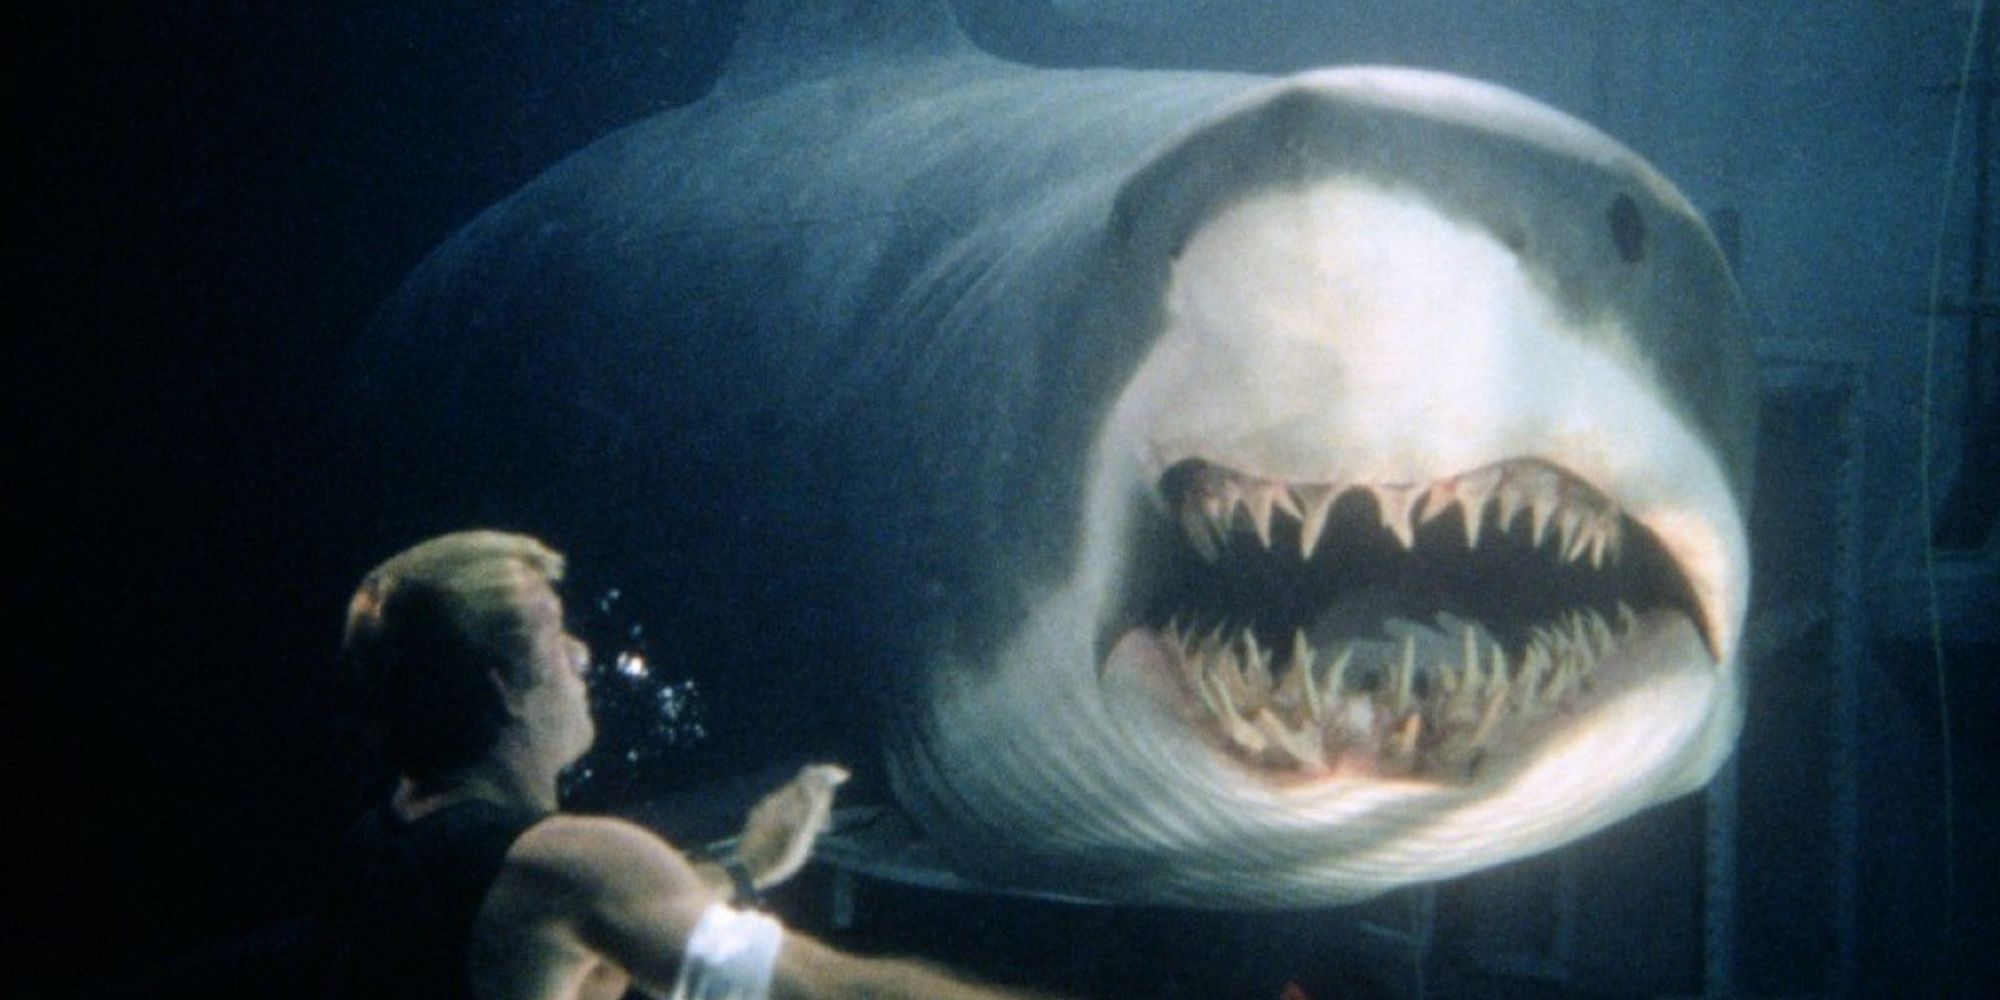 Carter encountering one of the sharks in Deep Blue Sea